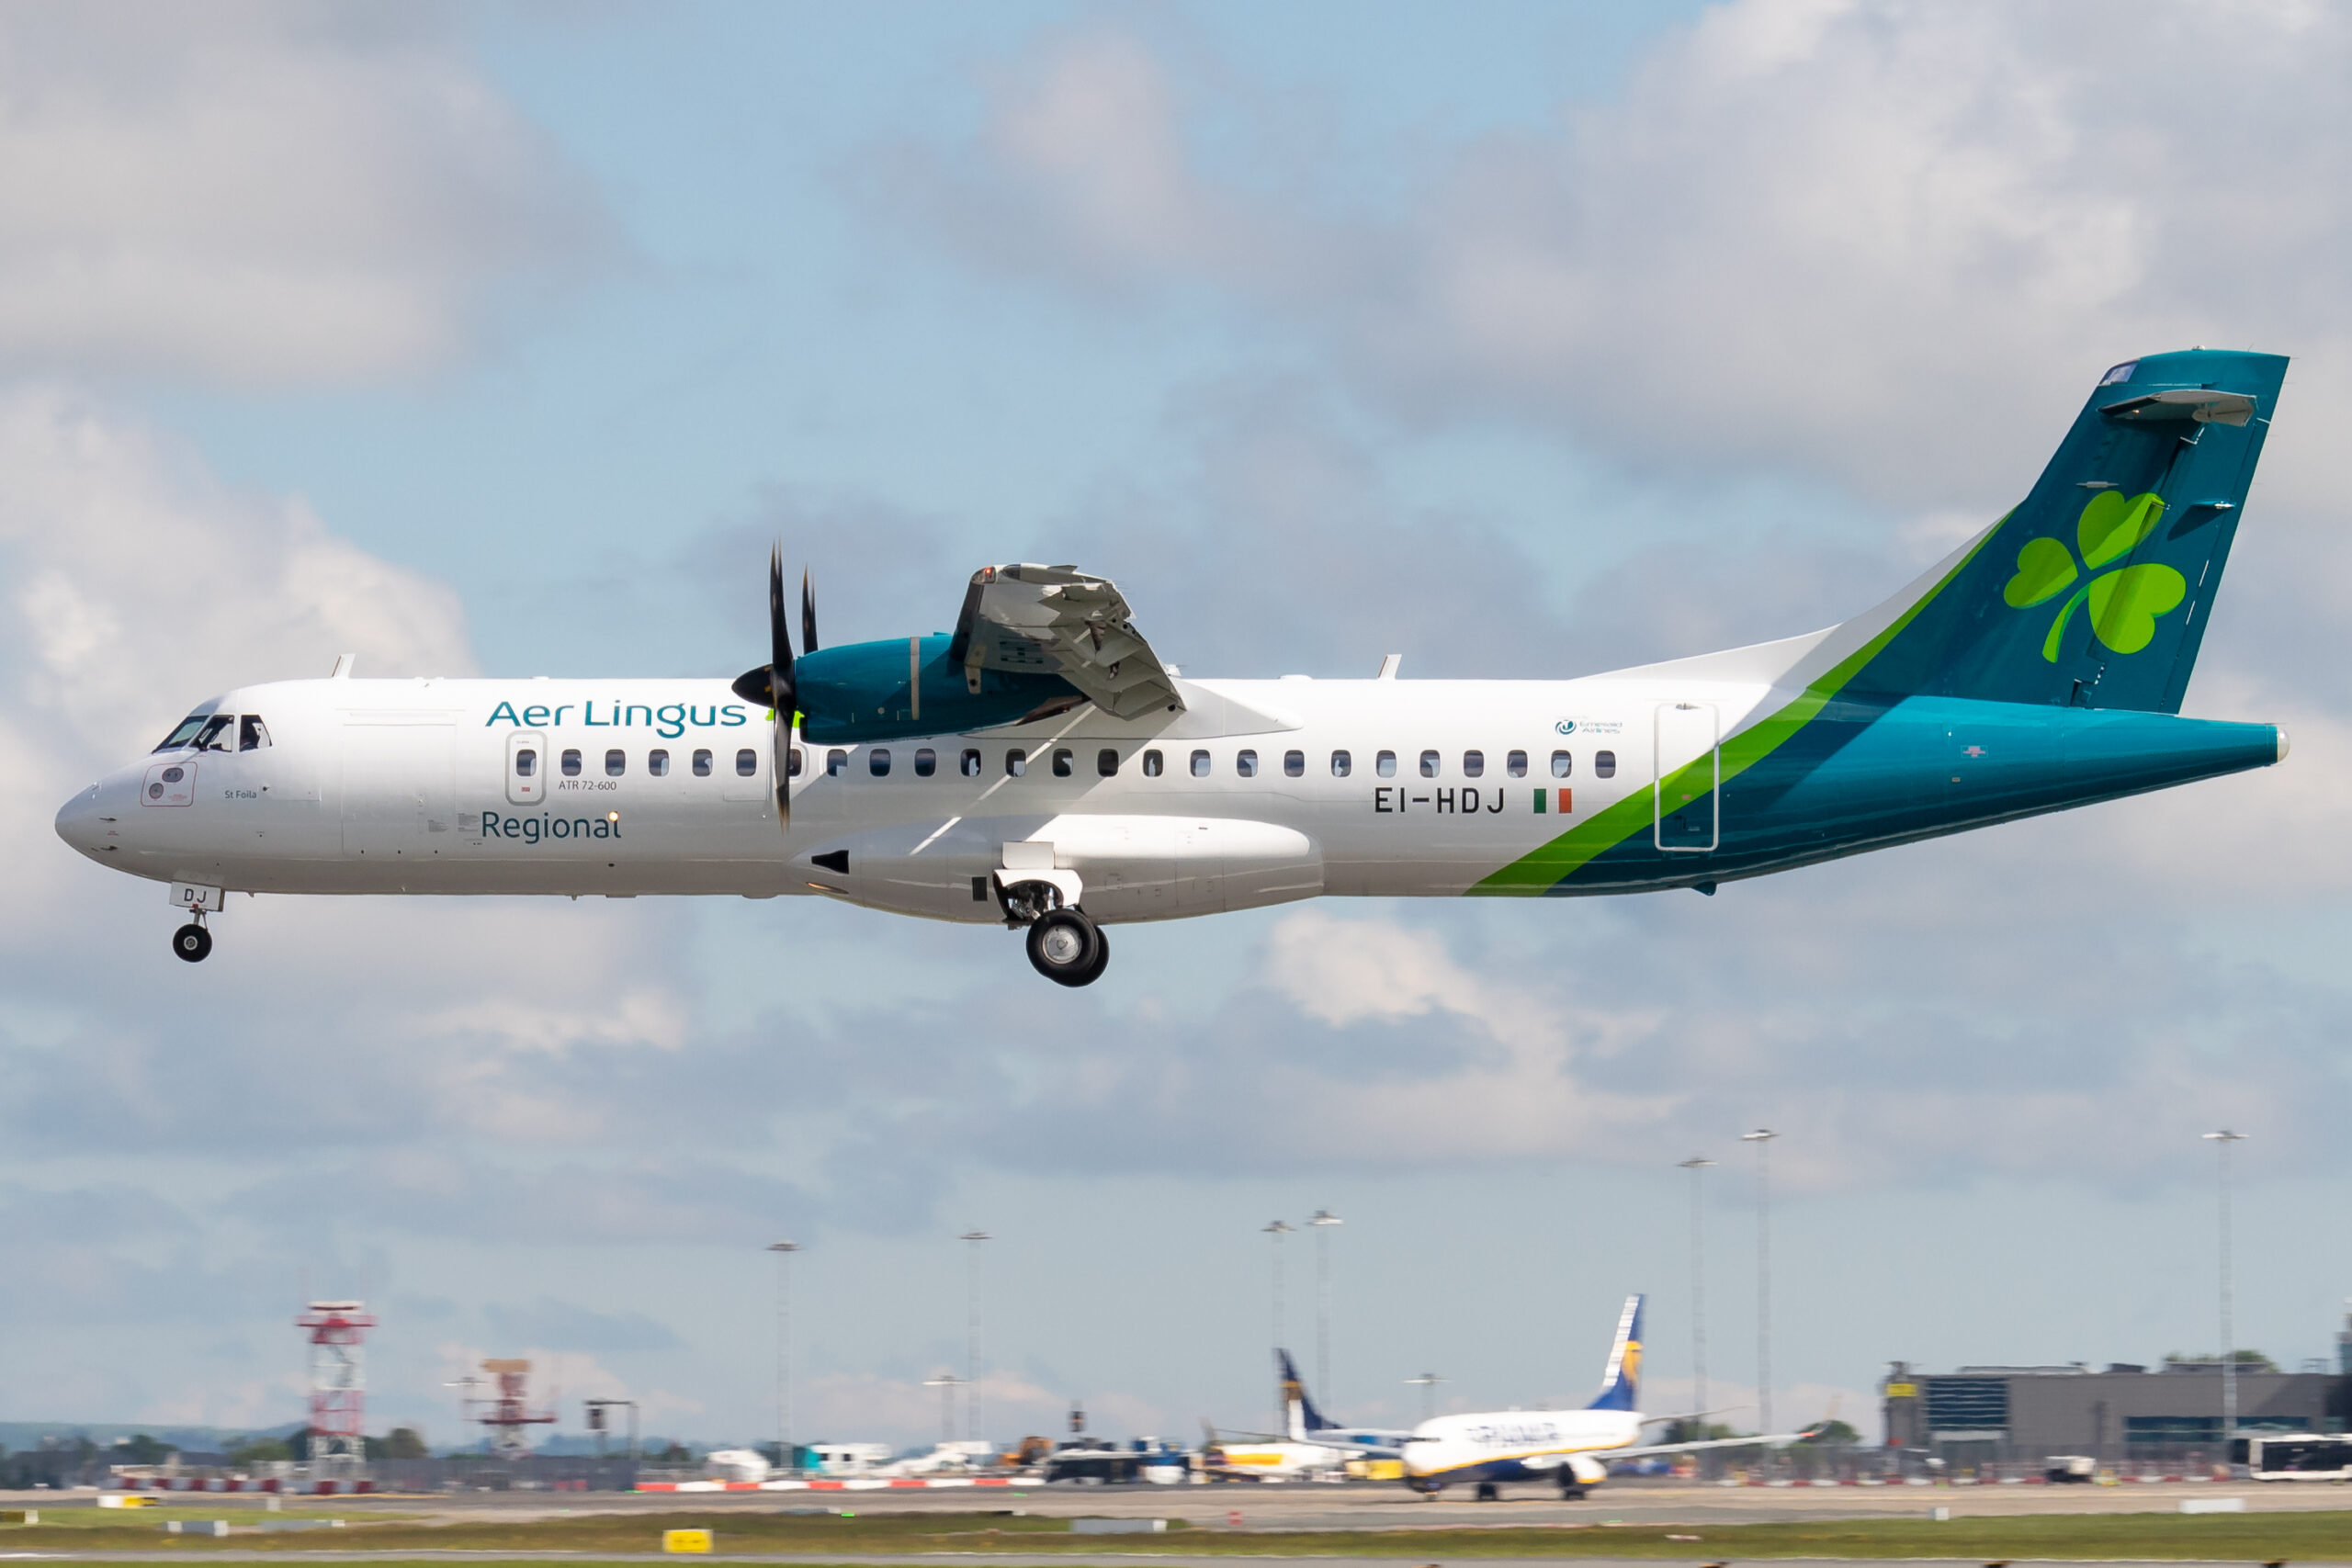 Emerald Airlines' Busy Few Weeks With Aer Lingus Regional